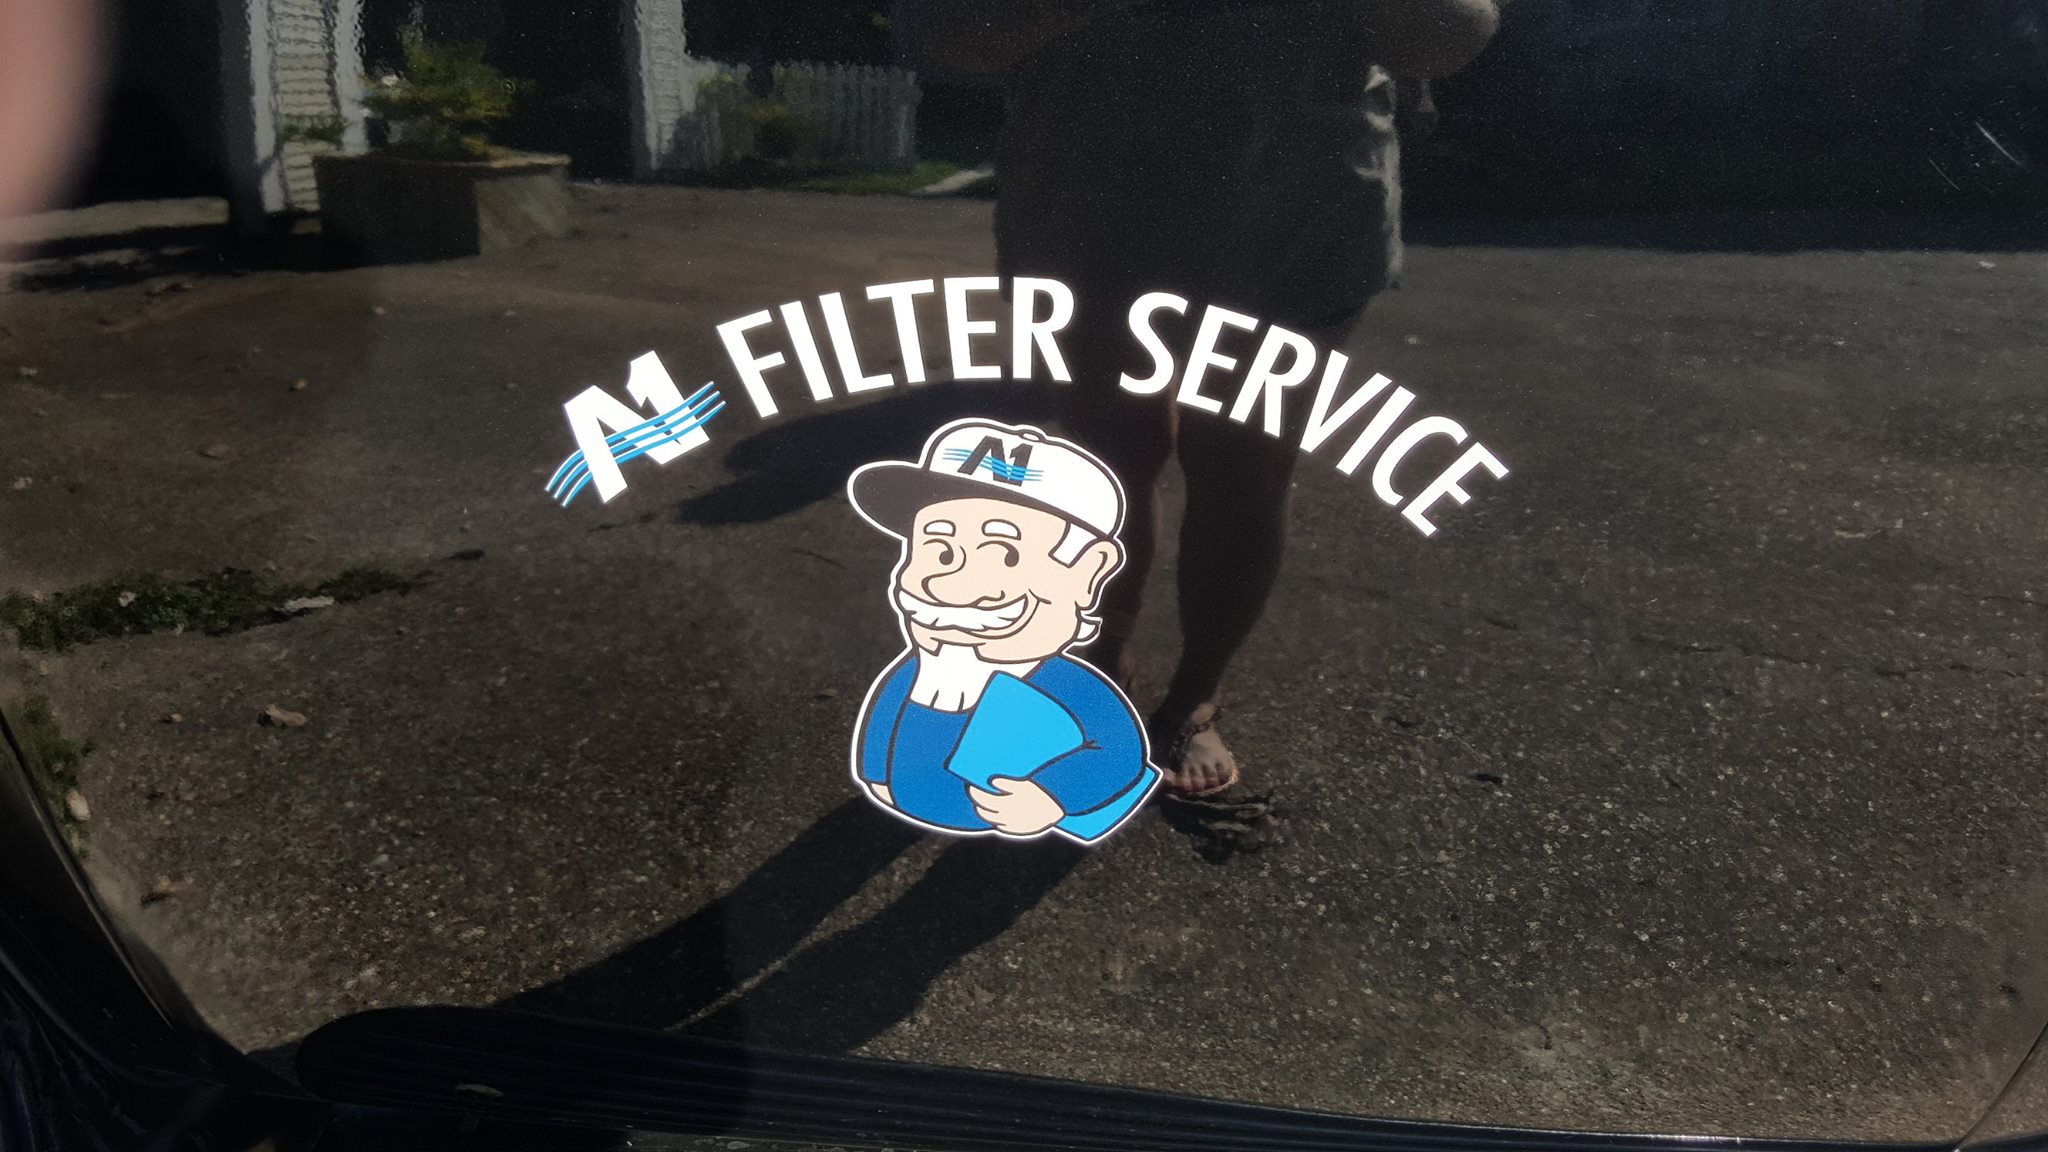 commercial AC filter Beaumont TX, commercial AC Filter SETX, commercial AC filters Houston, metal frame AC filters Houston, AC filter Service Baytown, Commercial AC filters Baytown TX